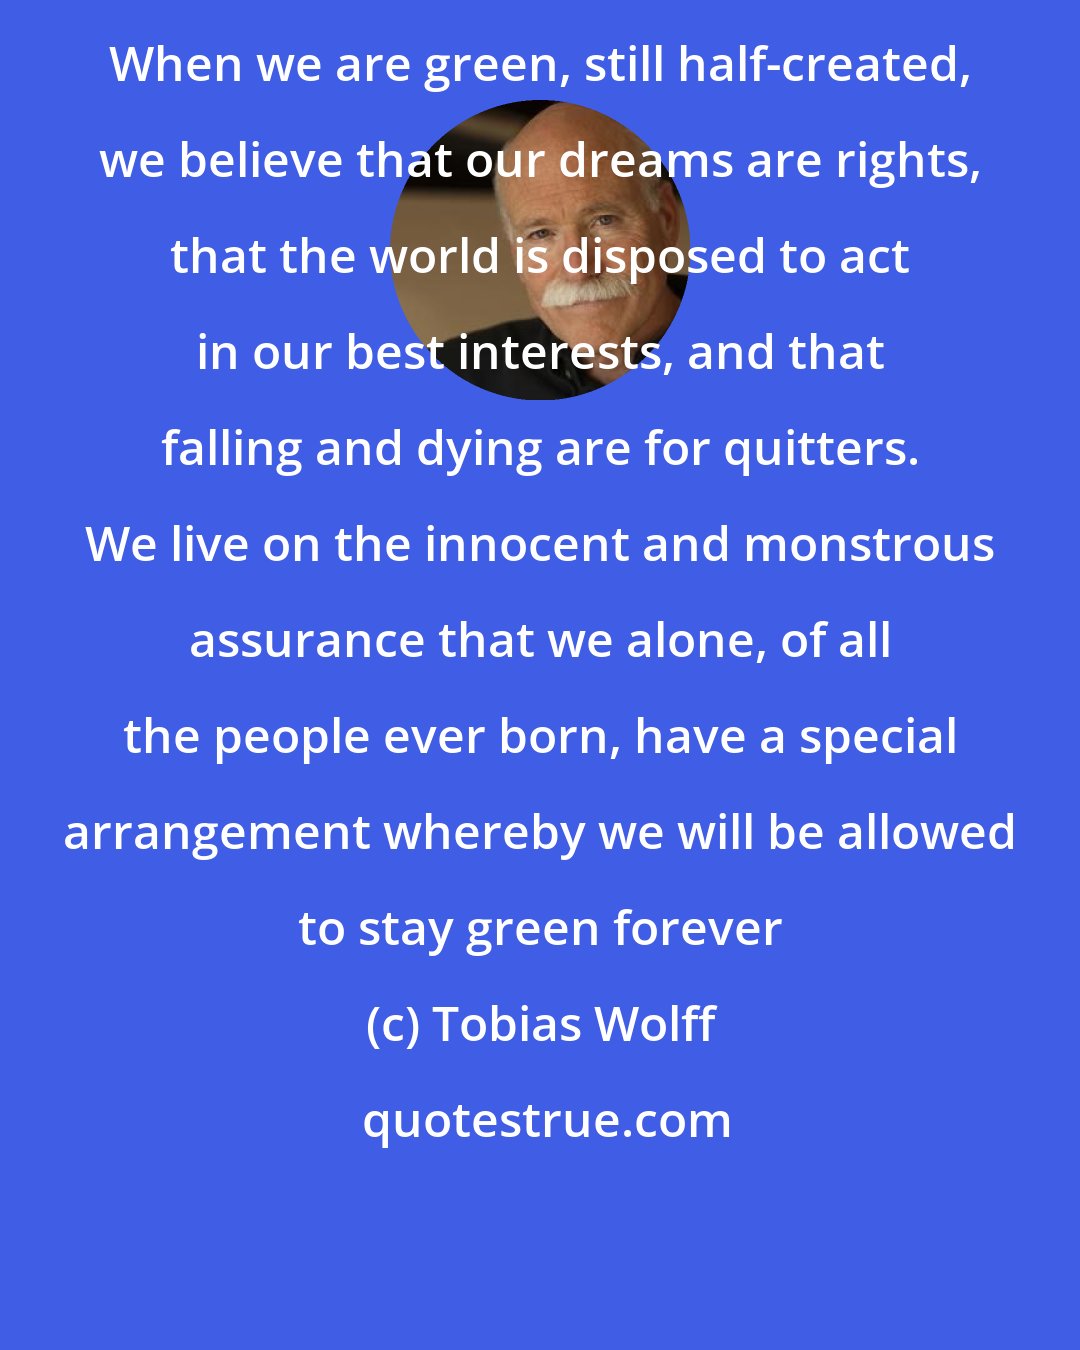 Tobias Wolff: When we are green, still half-created, we believe that our dreams are rights, that the world is disposed to act in our best interests, and that falling and dying are for quitters. We live on the innocent and monstrous assurance that we alone, of all the people ever born, have a special arrangement whereby we will be allowed to stay green forever